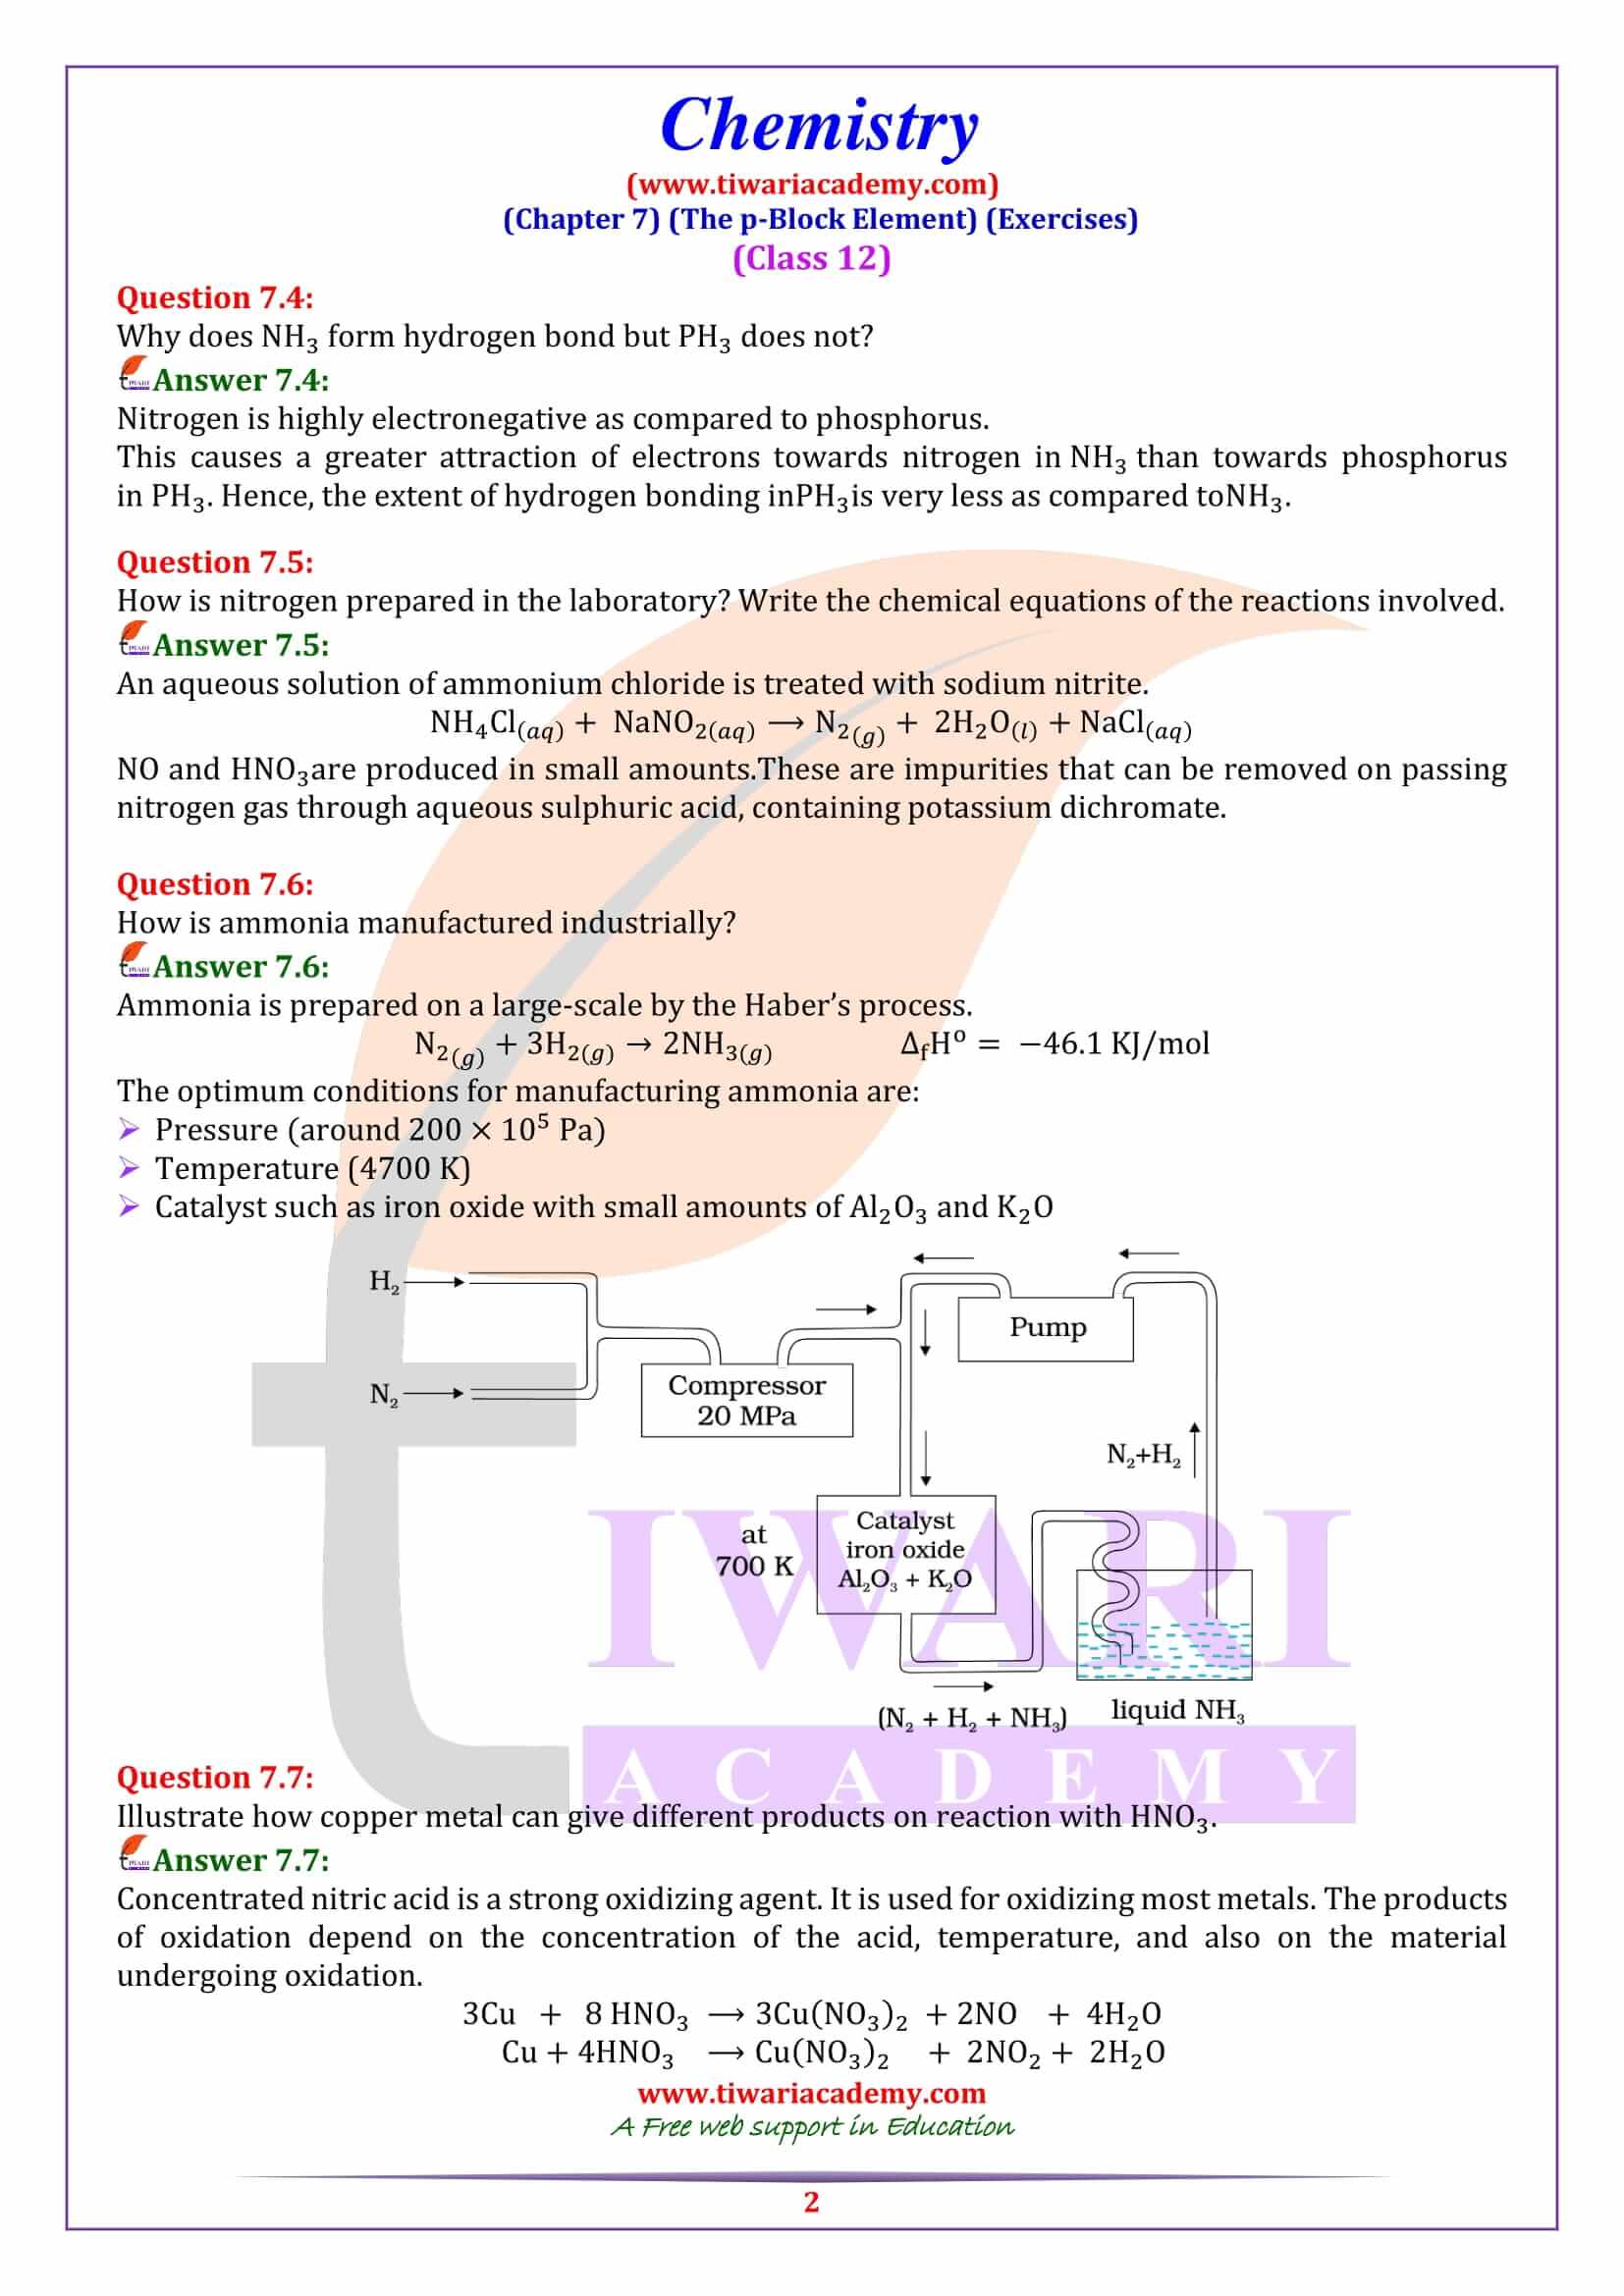 NCERT Solutions for Class 12 Chemistry Chapter 7 p Block